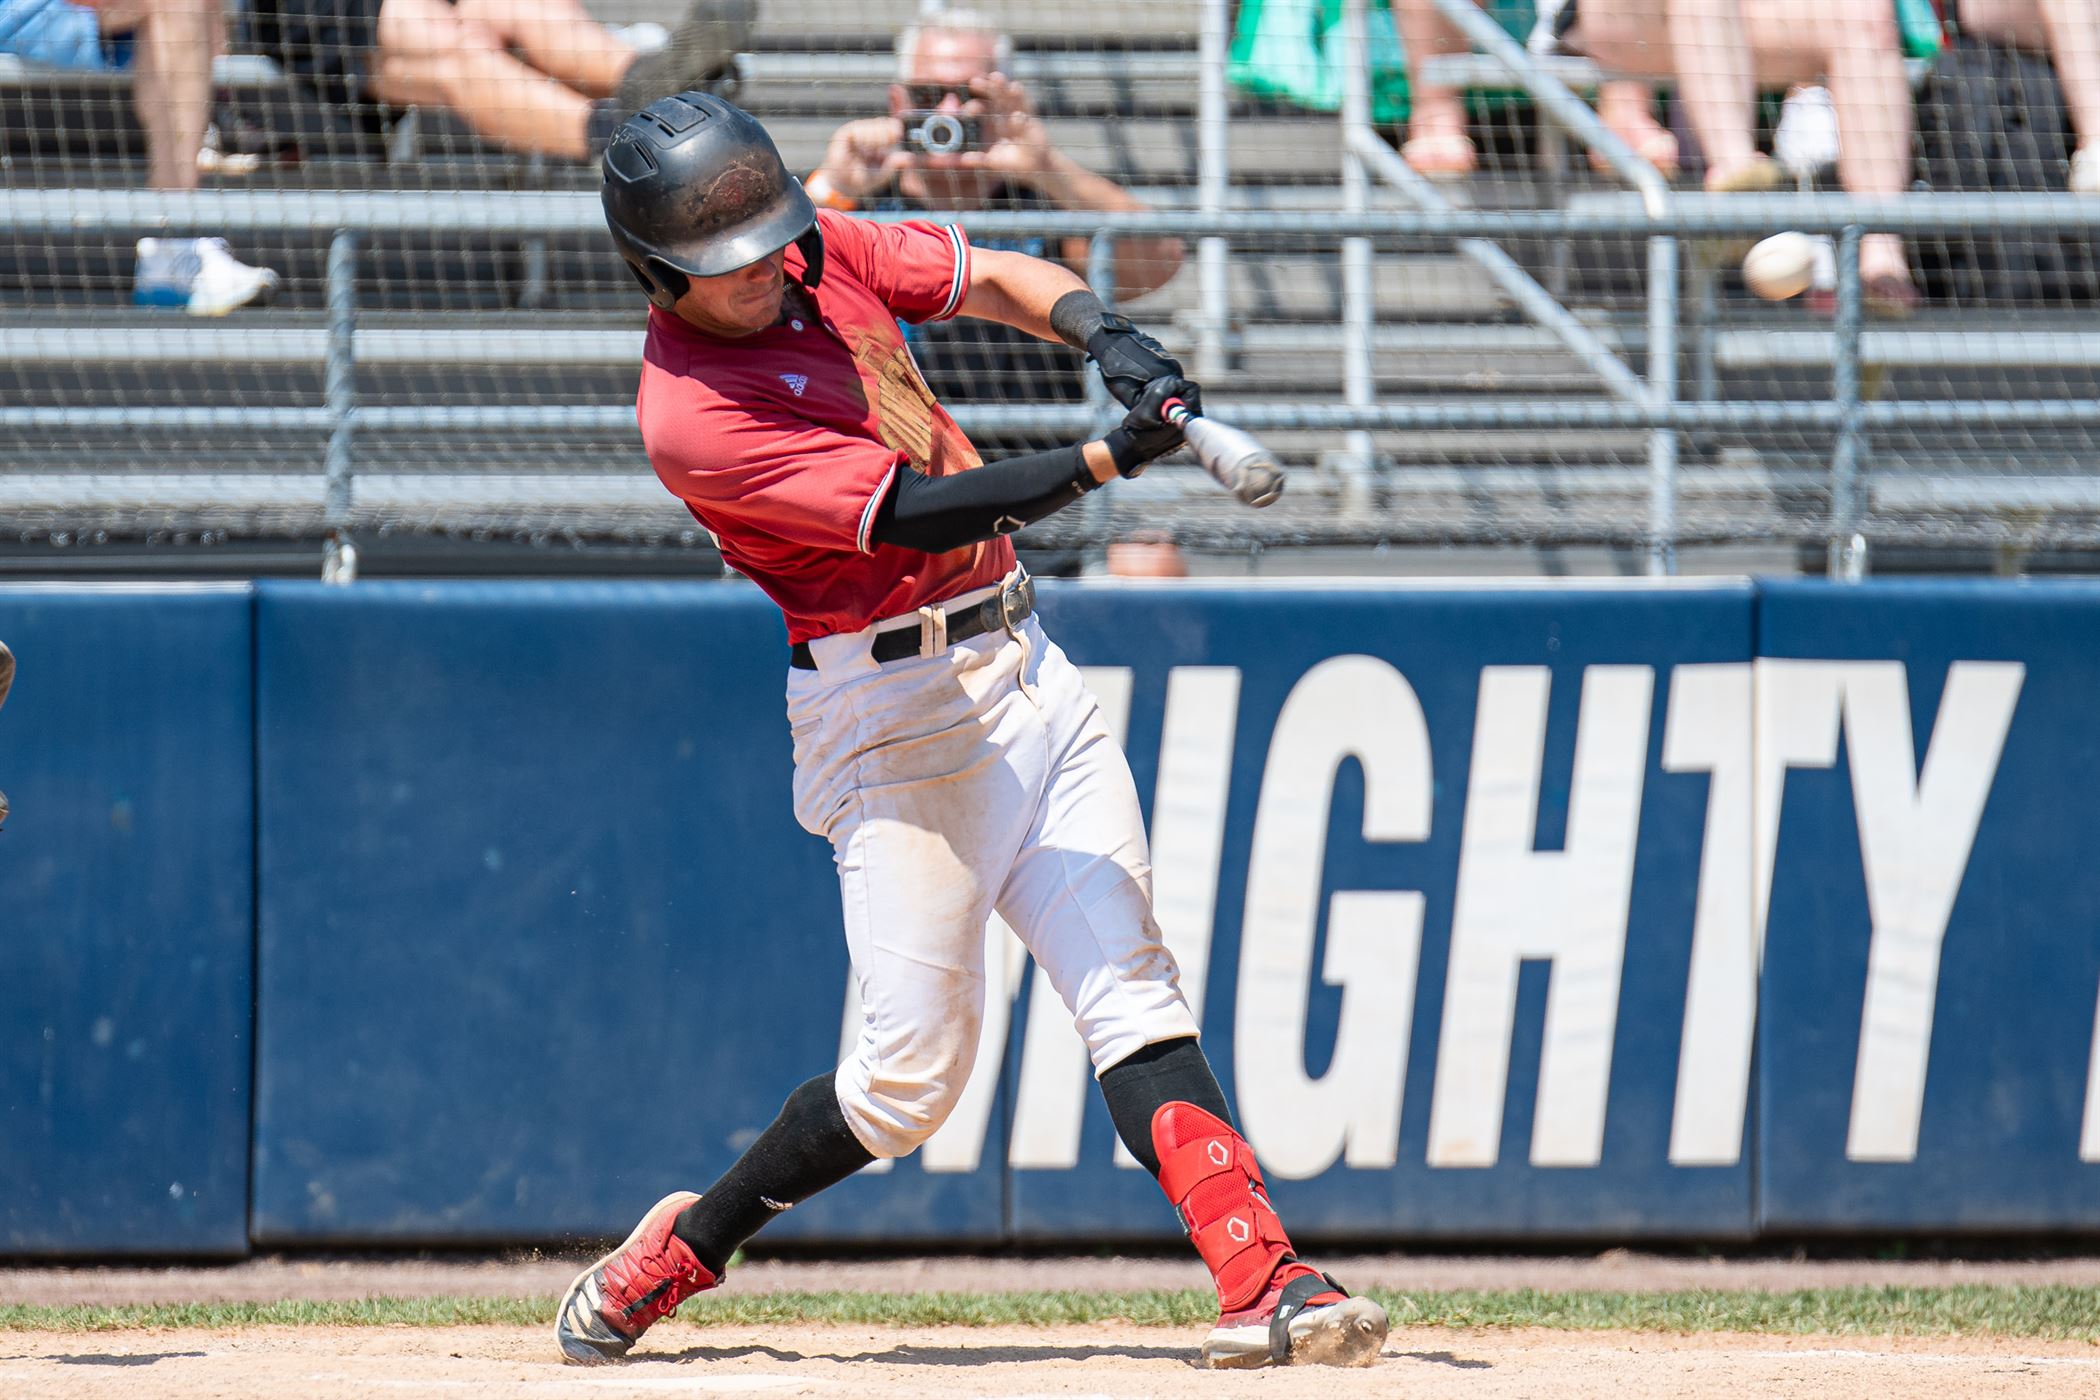 The bats did have some positives for the Red Hawks, like Cosentino's game-tying home run late in the game against the Bombers. Spencer Honda | Keystone Athletics